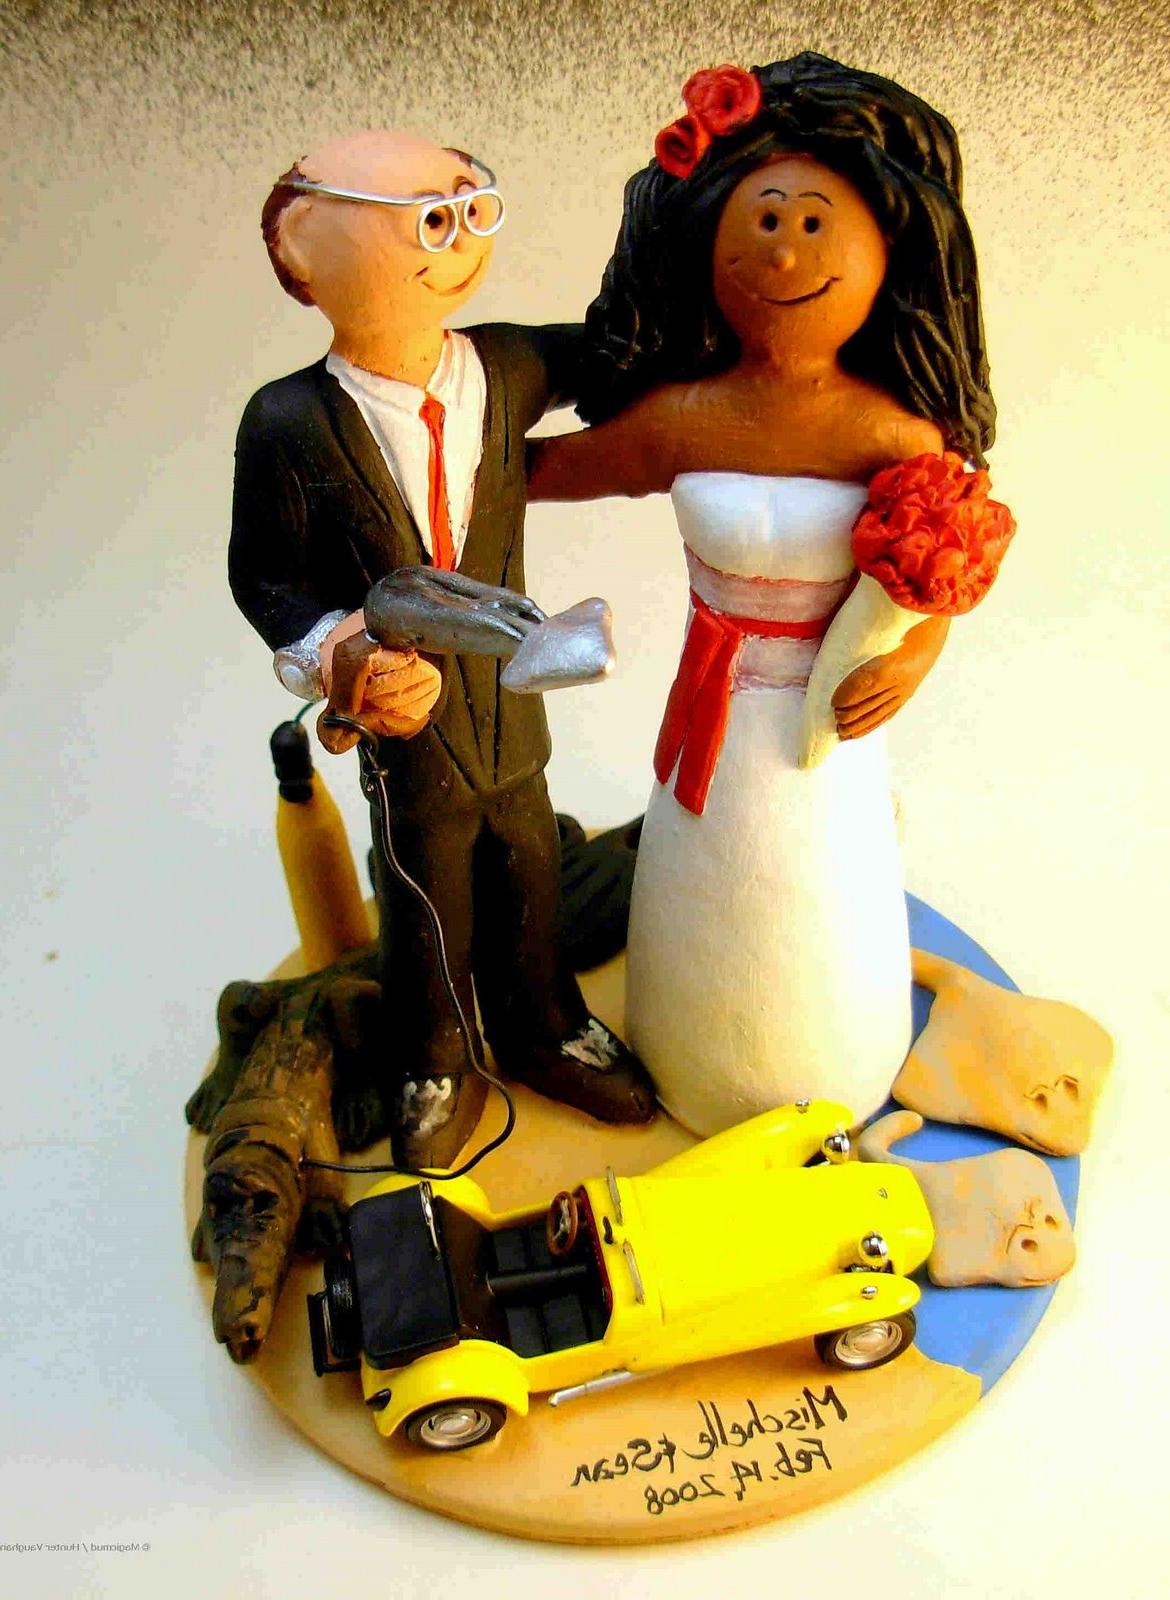 wedding cake topper is a